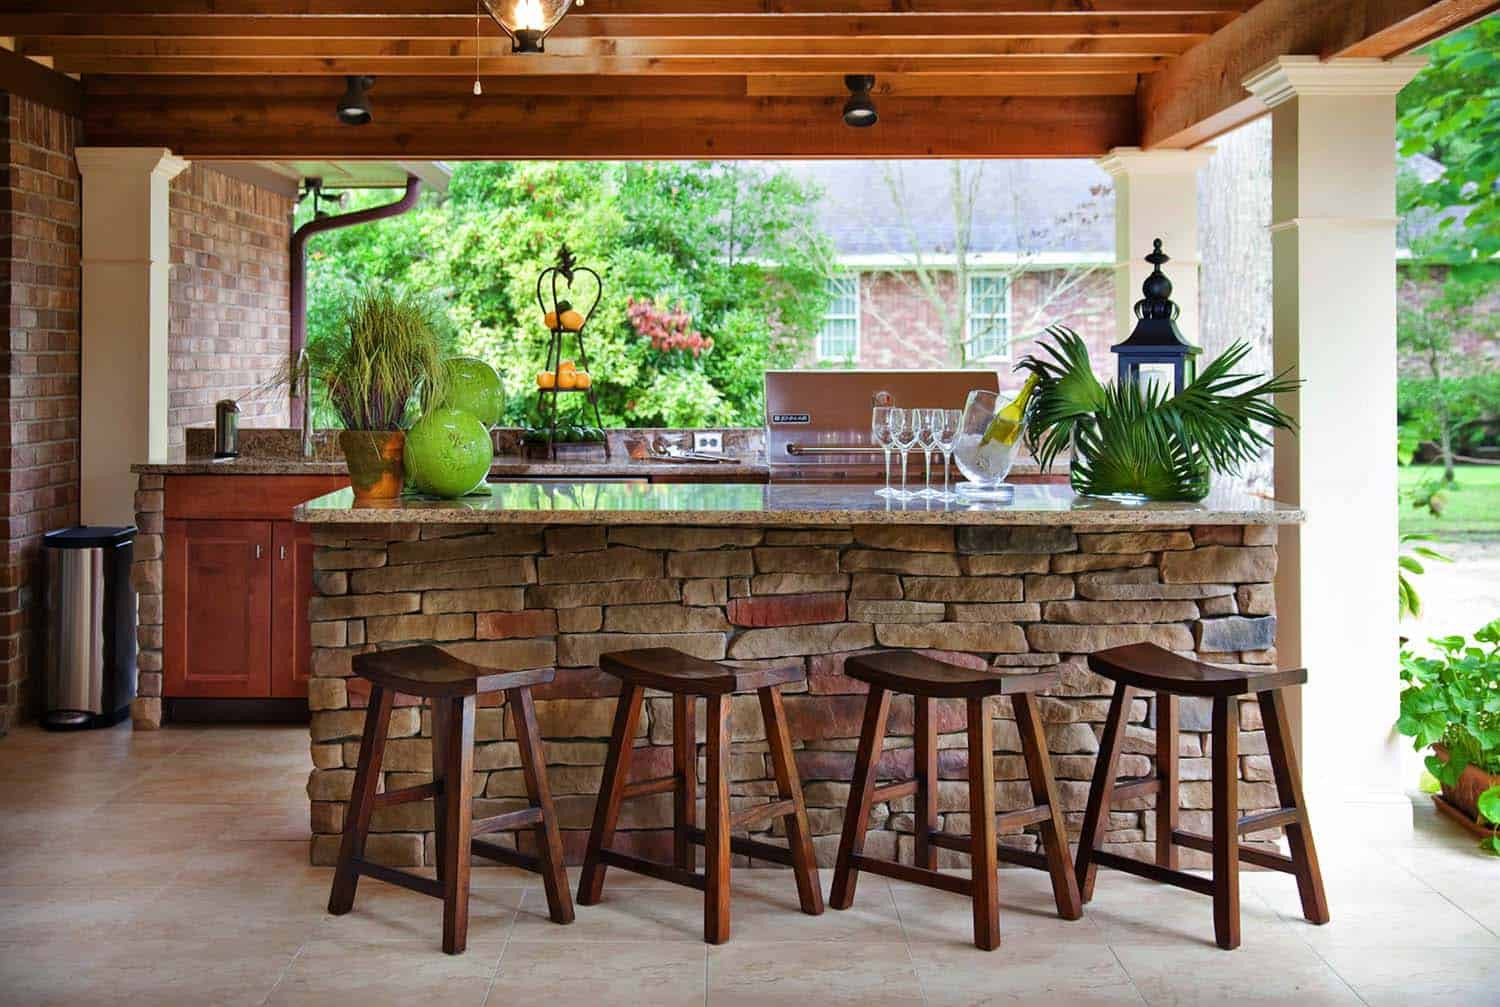 Portable Outdoor Kitchens
 20 Spectacular outdoor kitchens with bars for entertaining